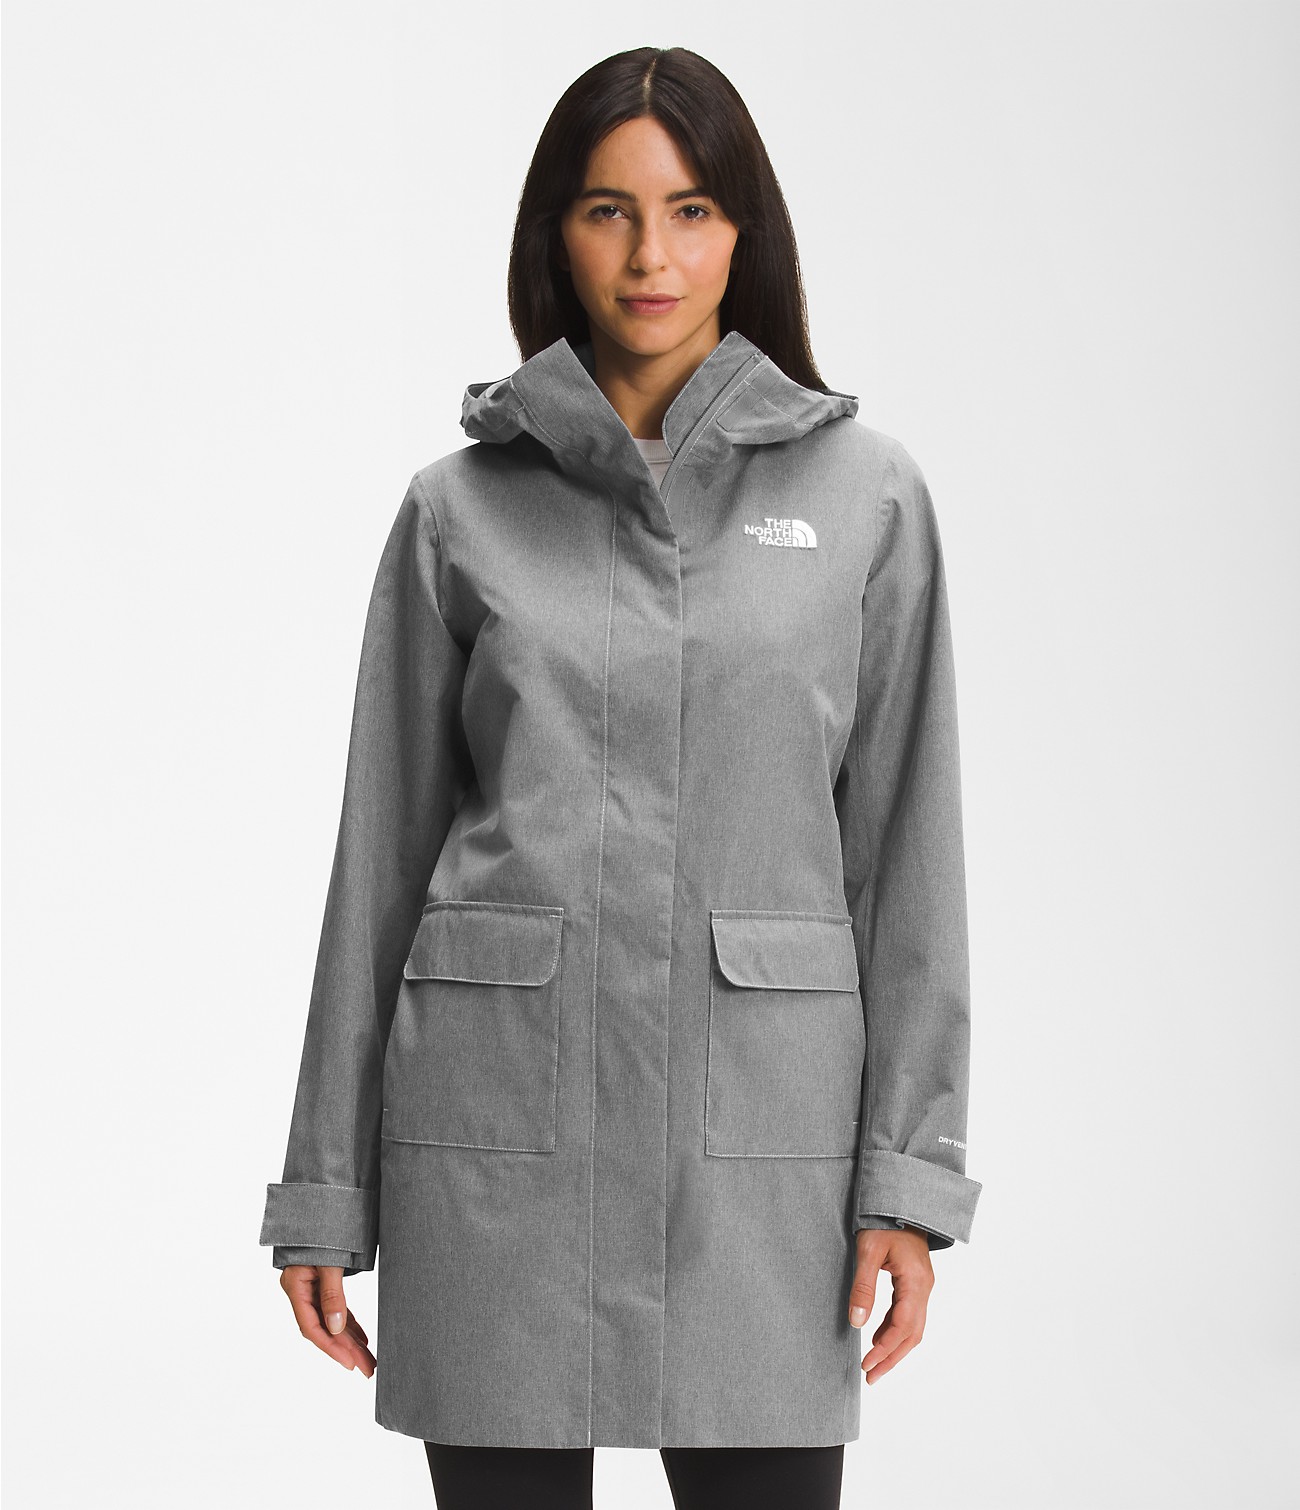 Unlock Wilderness' choice in the Eddie Bauer Vs North Face comparison, the City Breeze Rain Parka II by The North Face